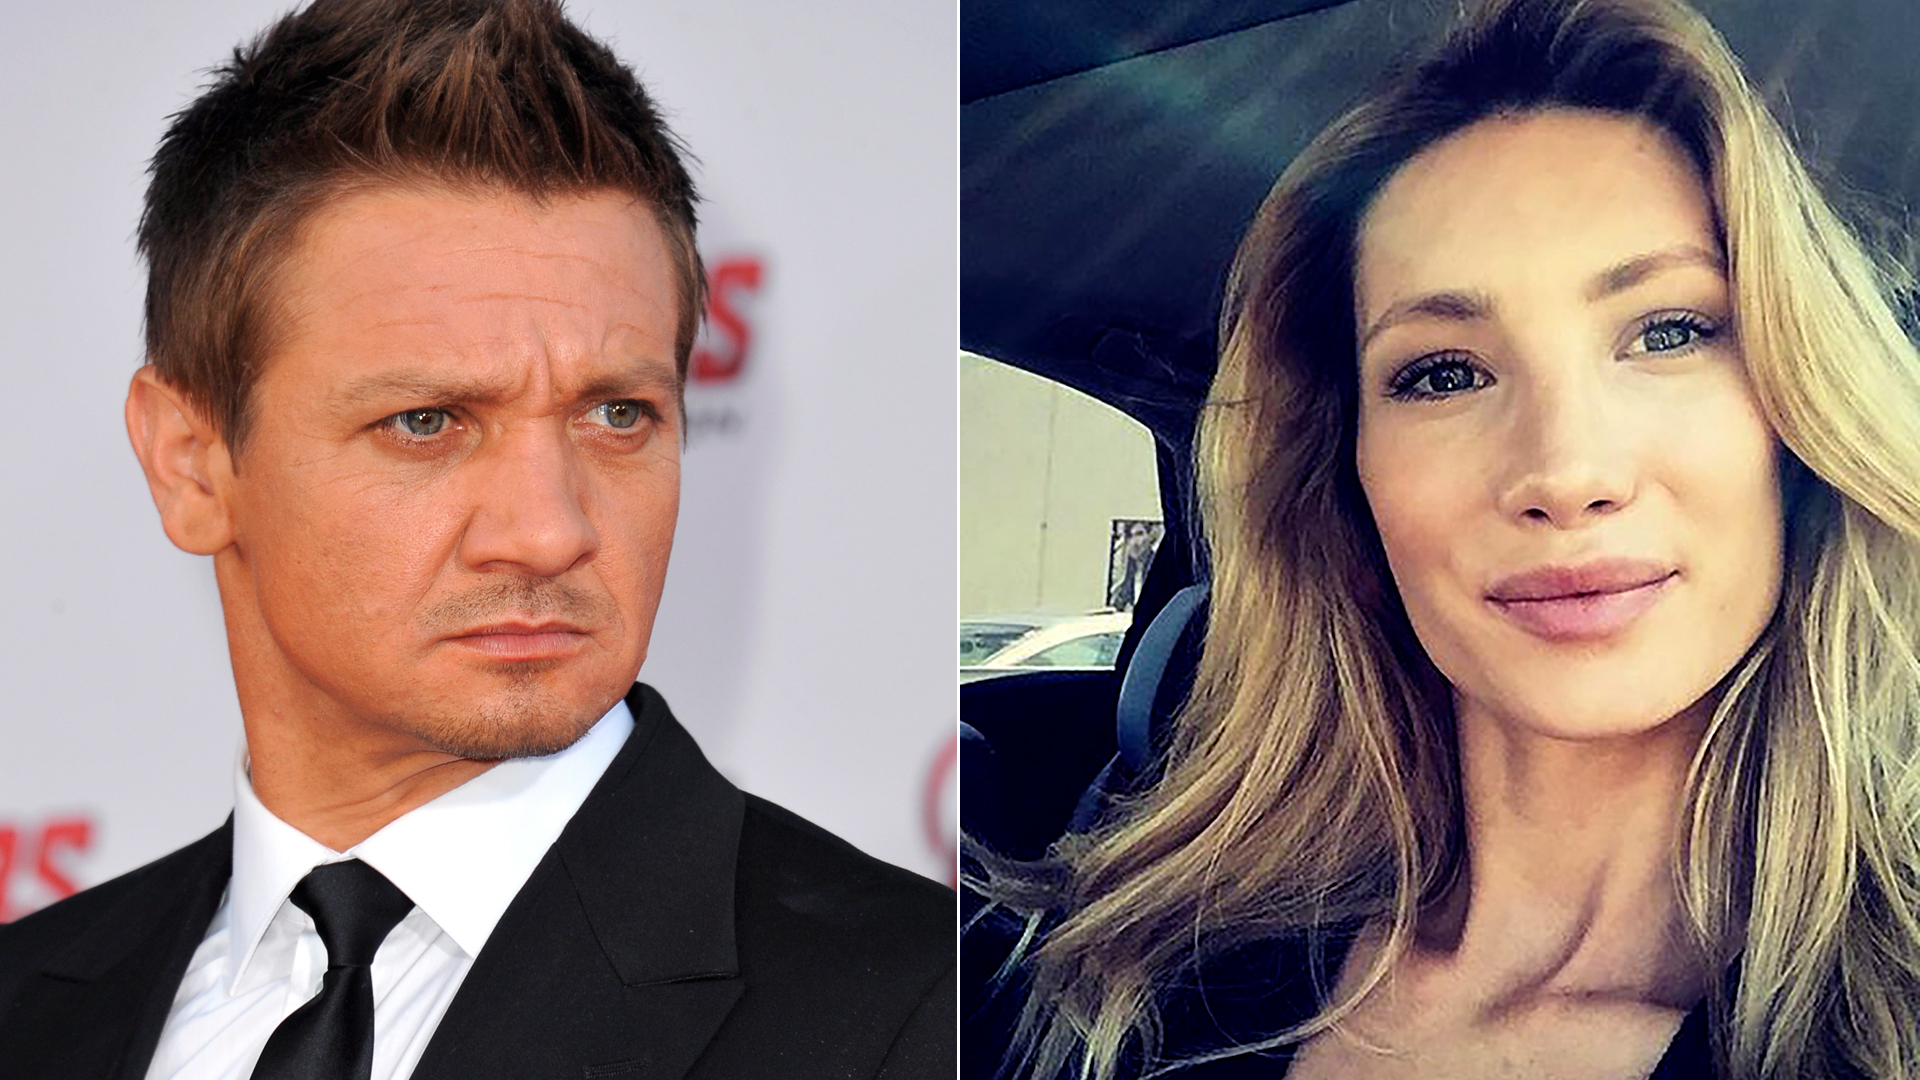 Jeremy Renner accused his ex-wife of showing nude photos of him to humiliate him and take custody of their daughter